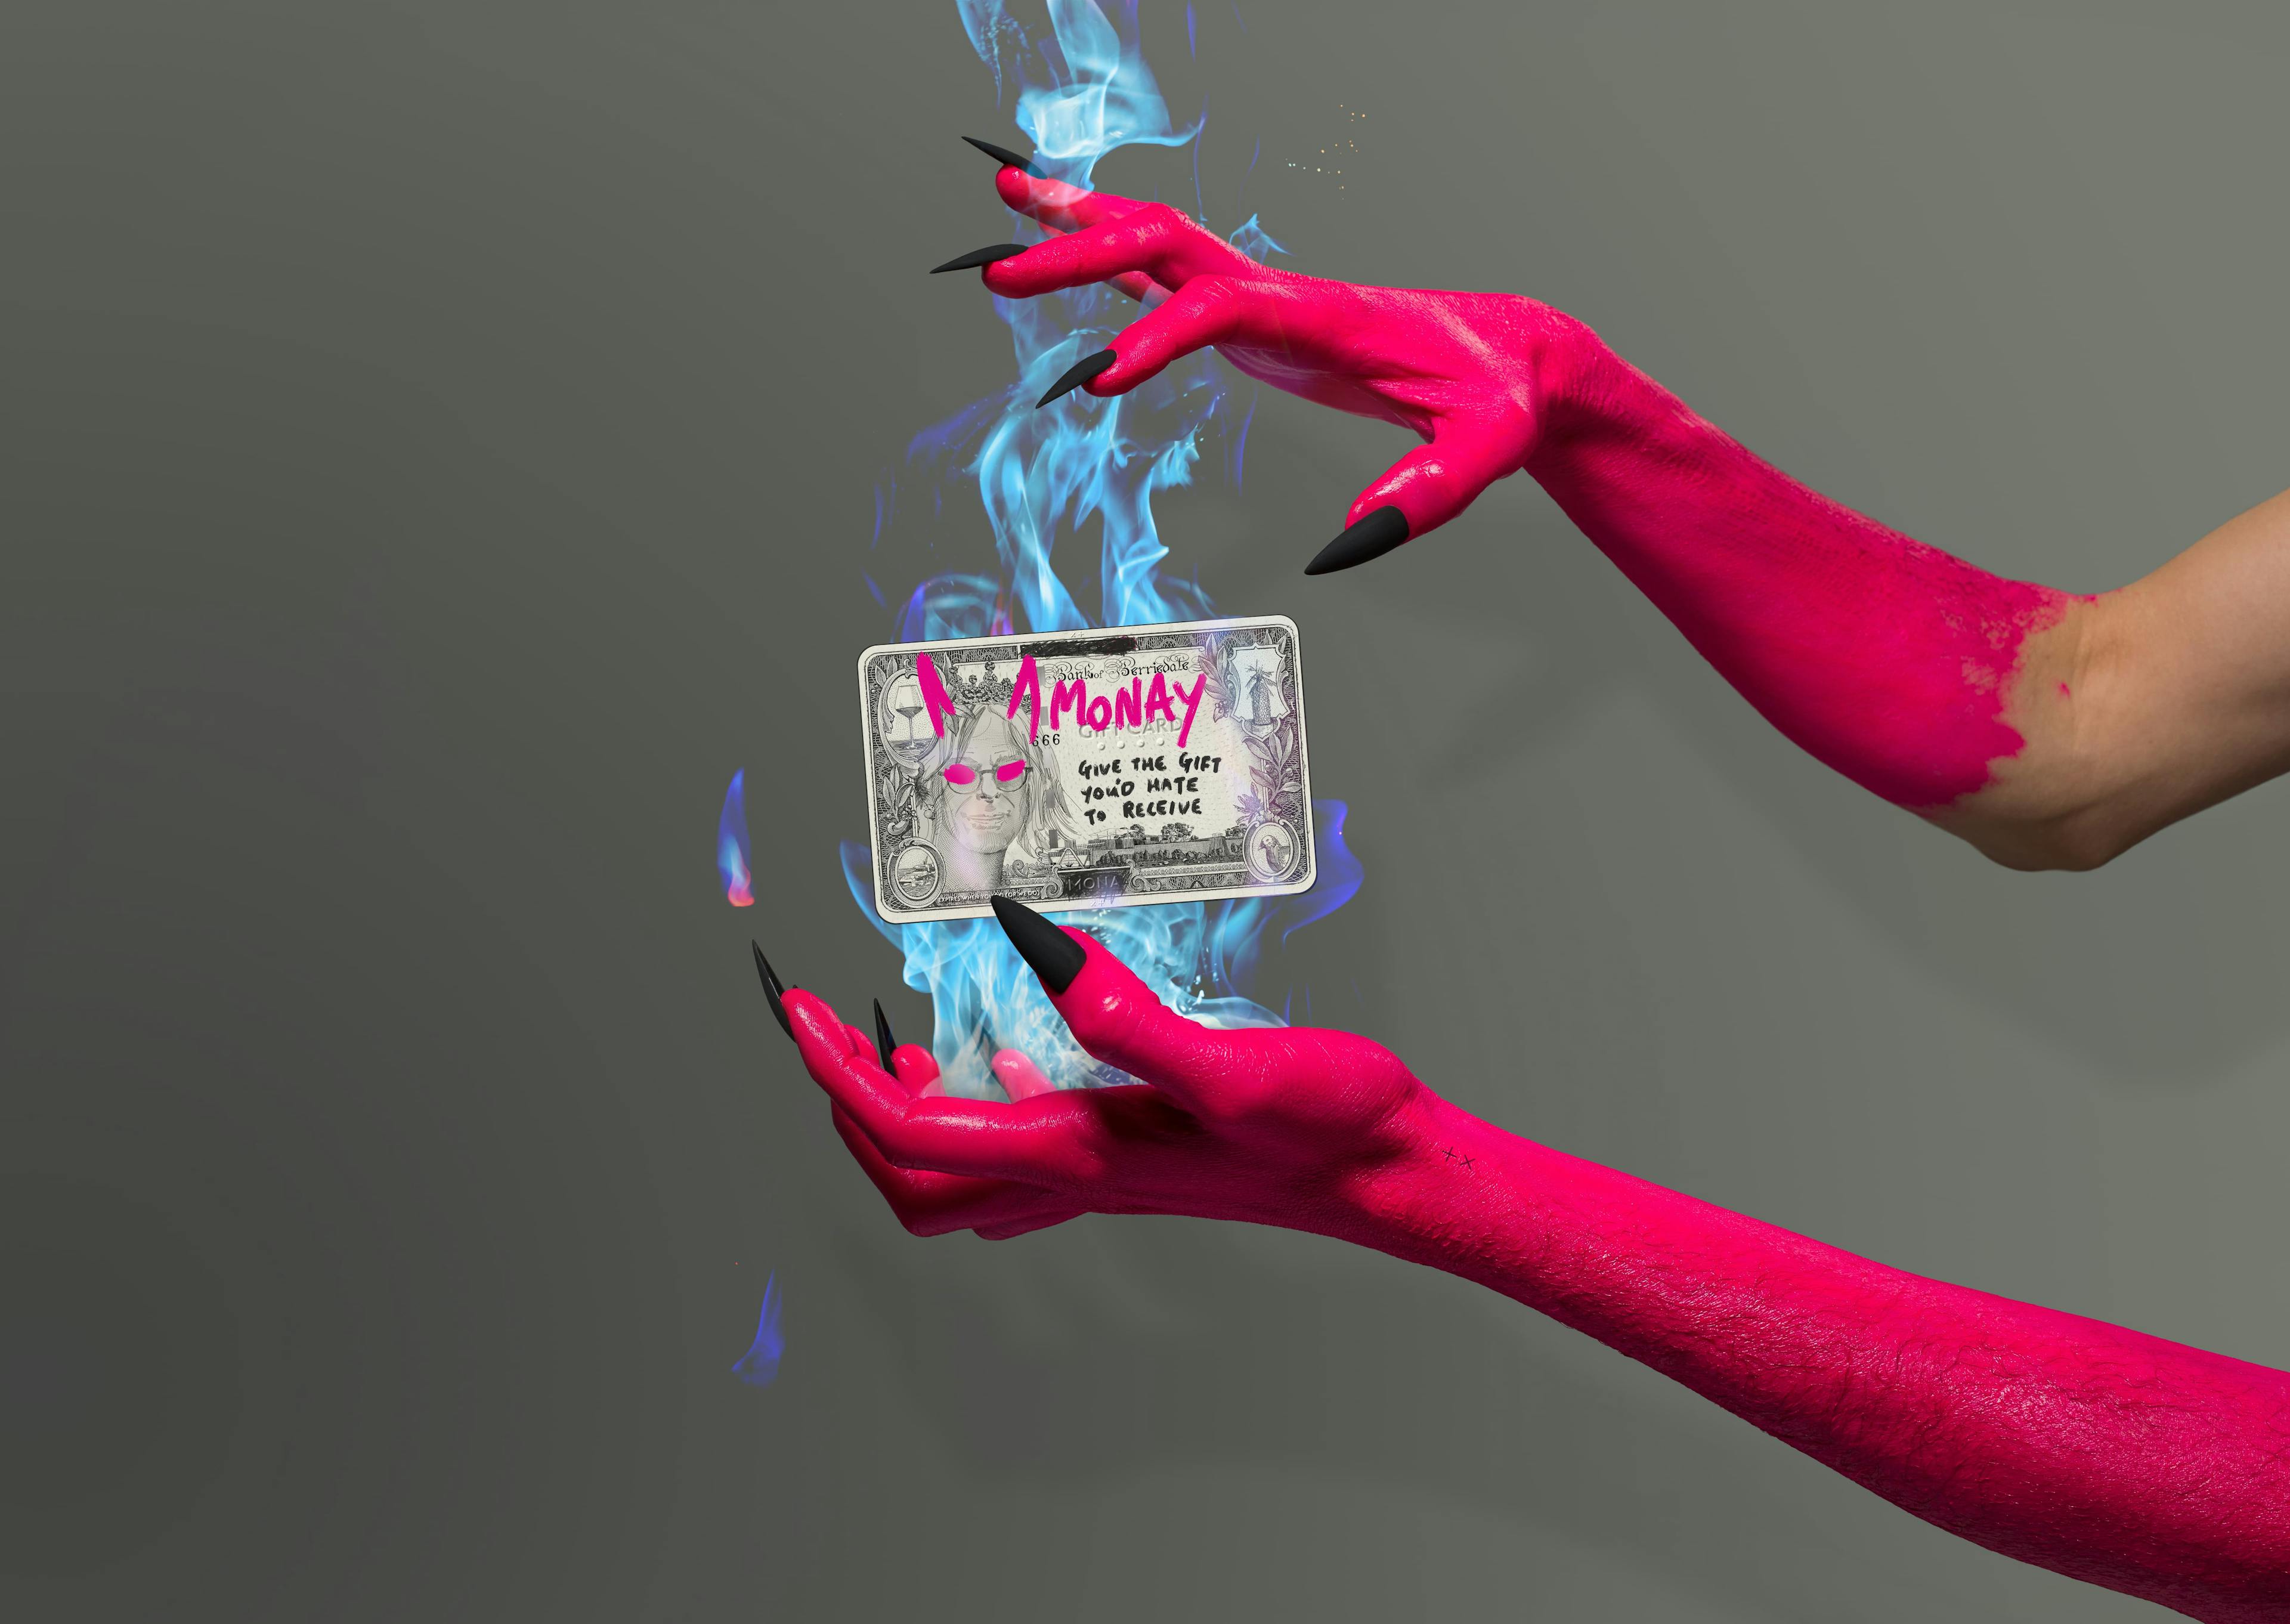 Pink hands with black claws holding blue flames and a Monay gift card.